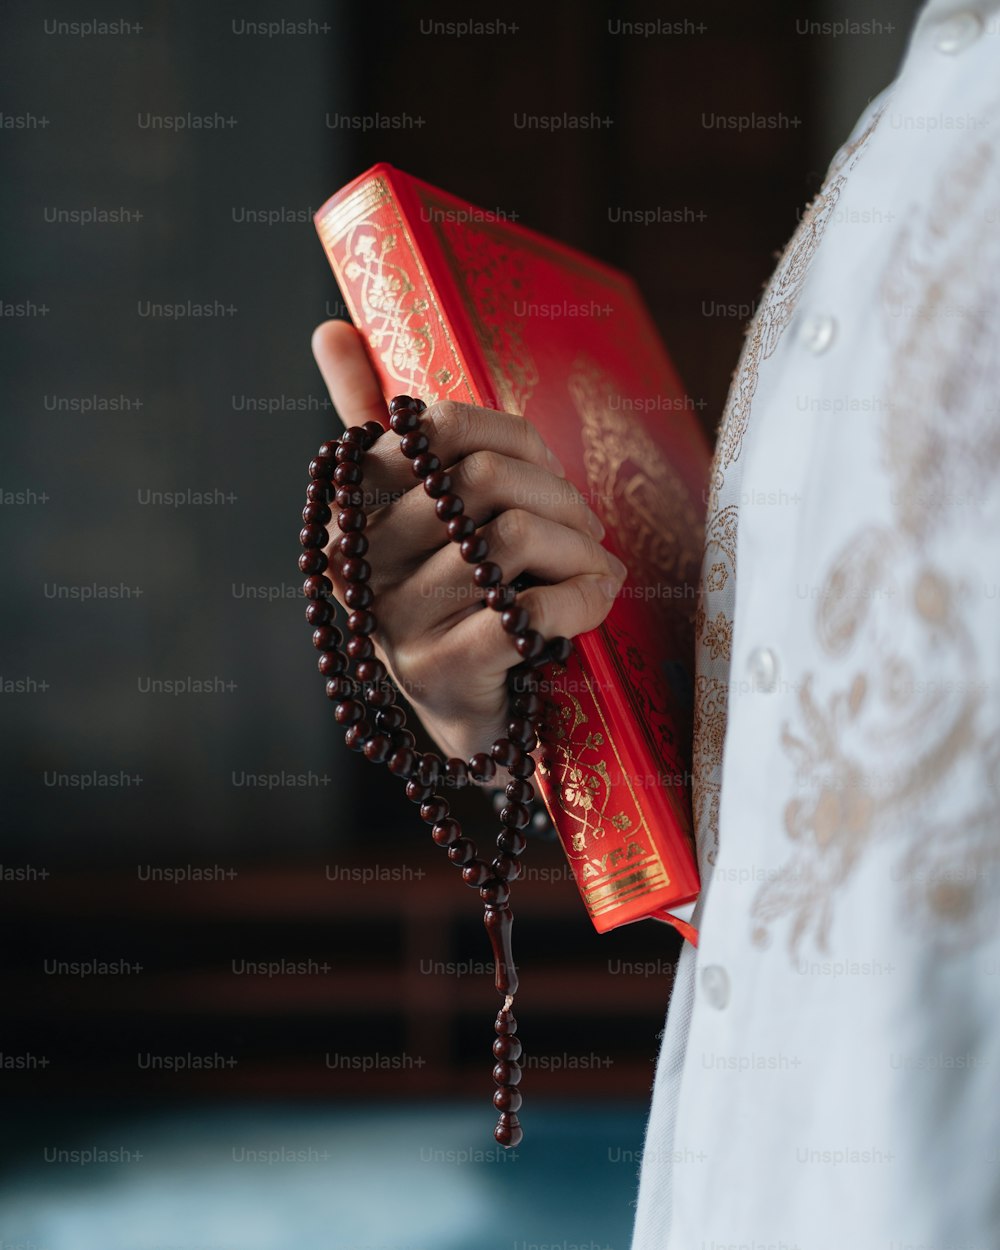 a person holding a rosary and a book